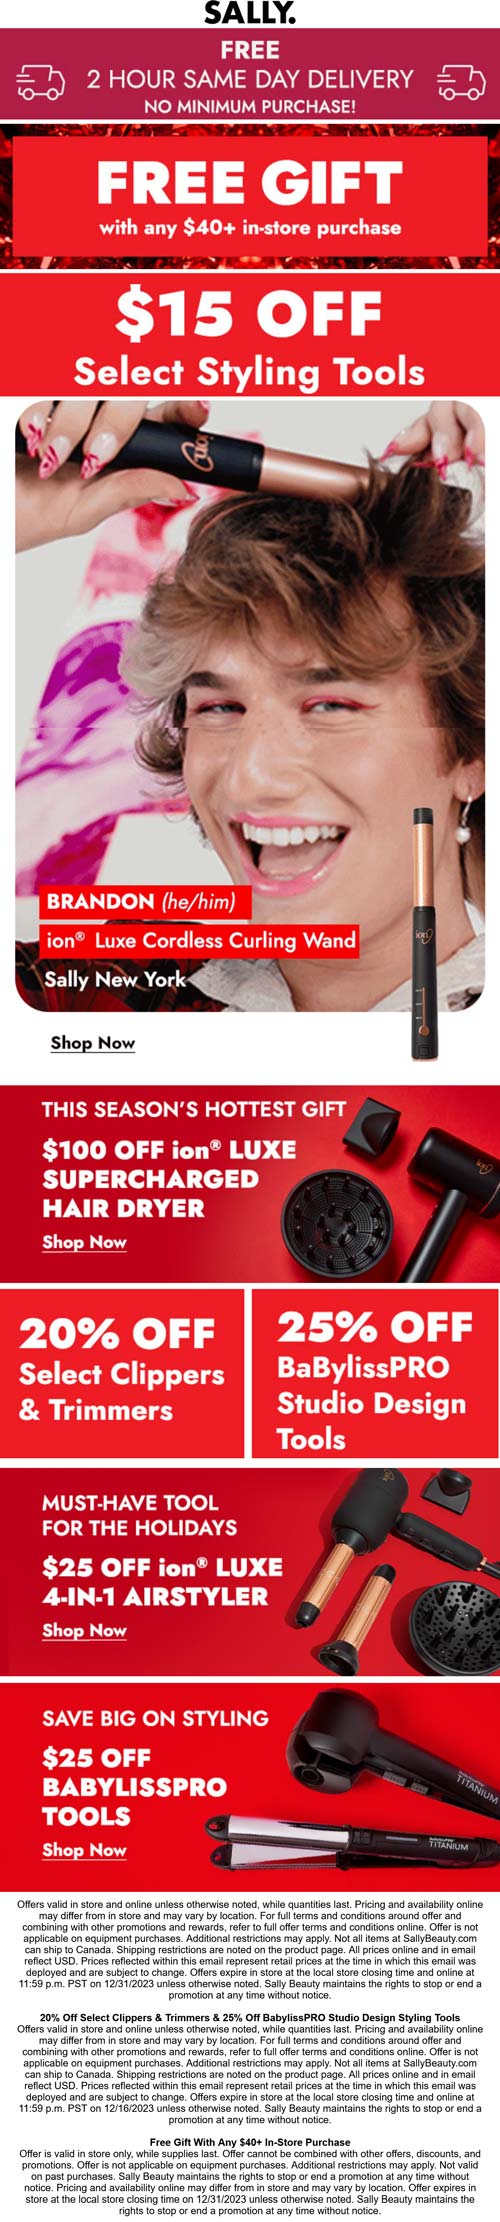 Sally stores Coupon  Free gift on $40, 25% off BabylissPRO & more at Sally beauty #sally 